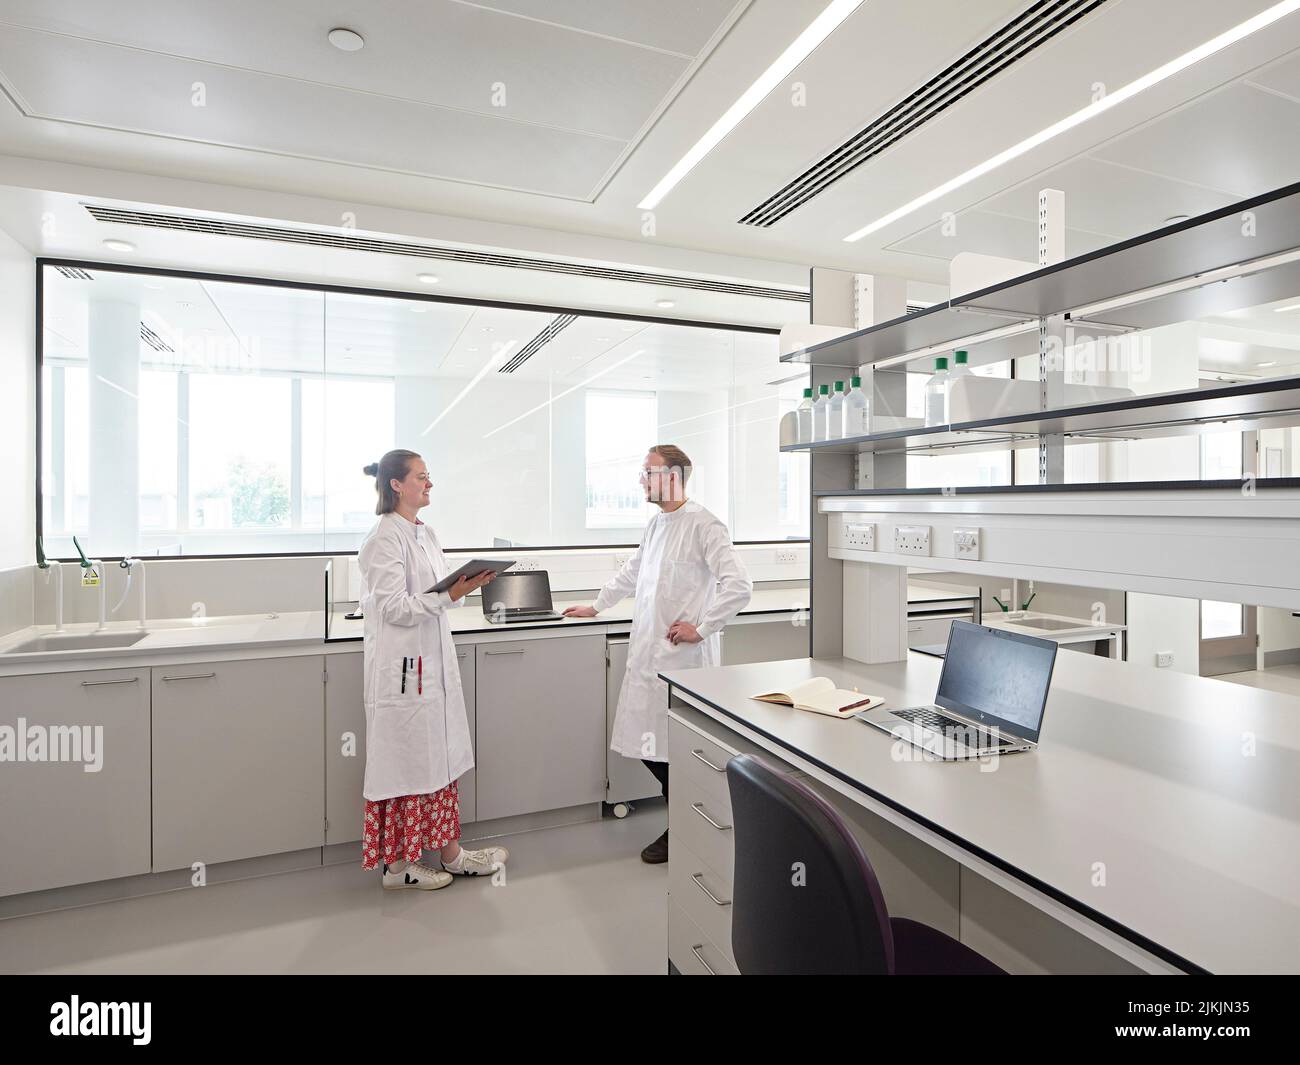 Lab interior with large window and communal workspace. Dorothy Crowfoot Hodgkin Building, Oxford, United Kingdom. Architect: Hawkins Brown Architects Stock Photo